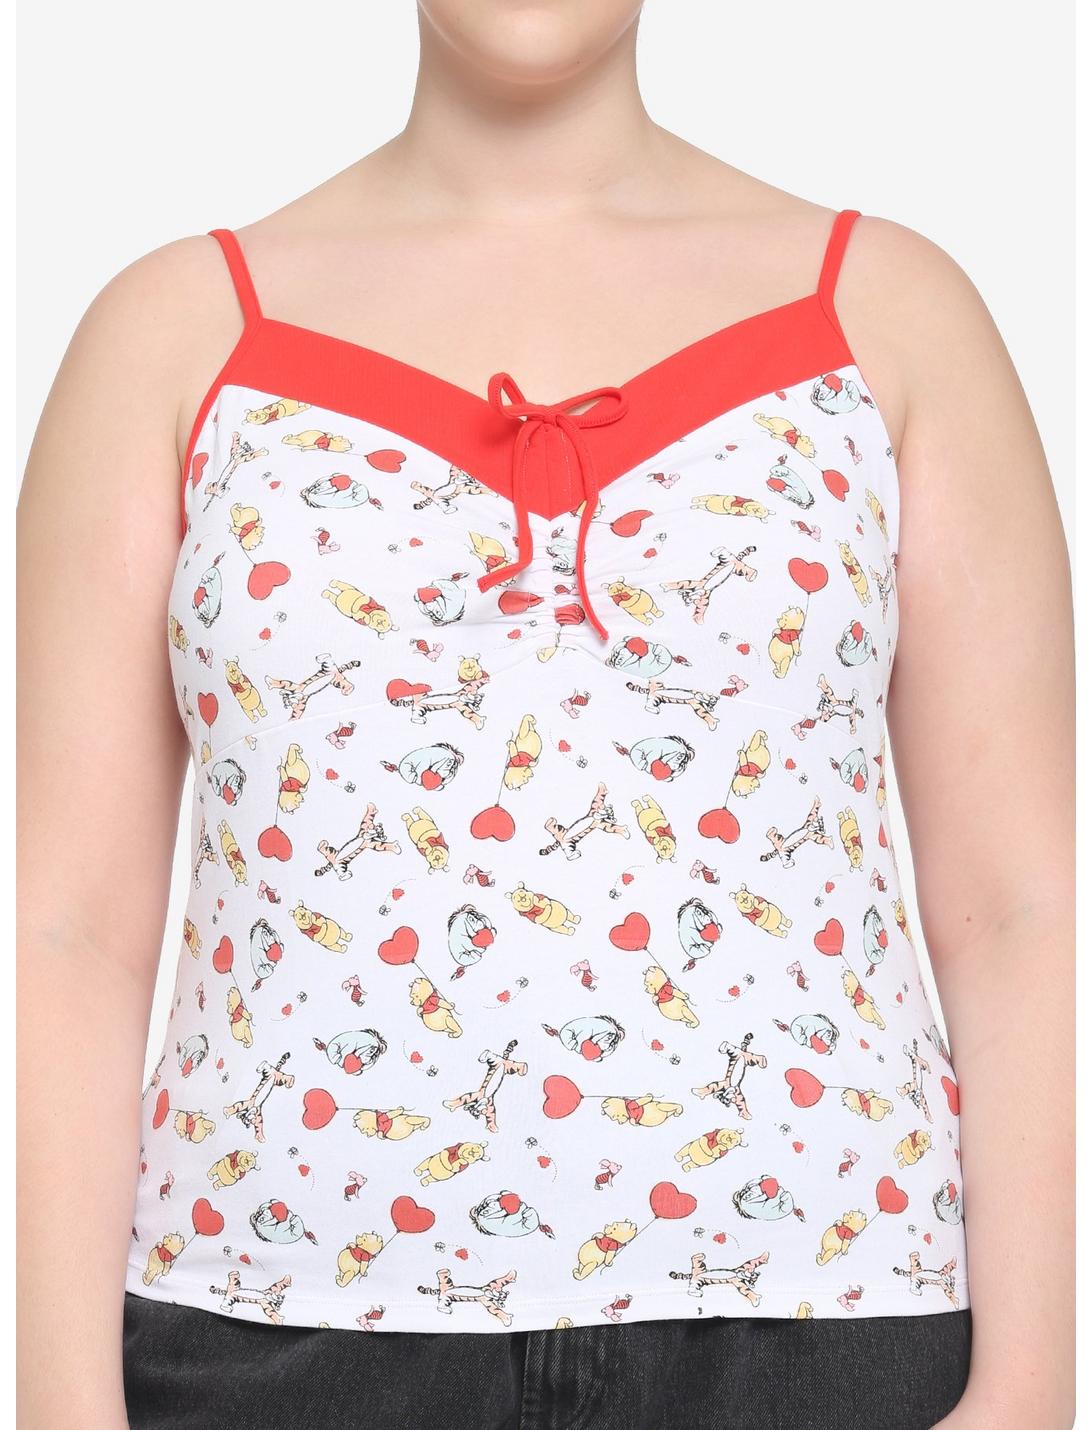 Her Universe Disney Winnie The Pooh Hearts Strappy Tank Top Plus Size, MULTI, hi-res